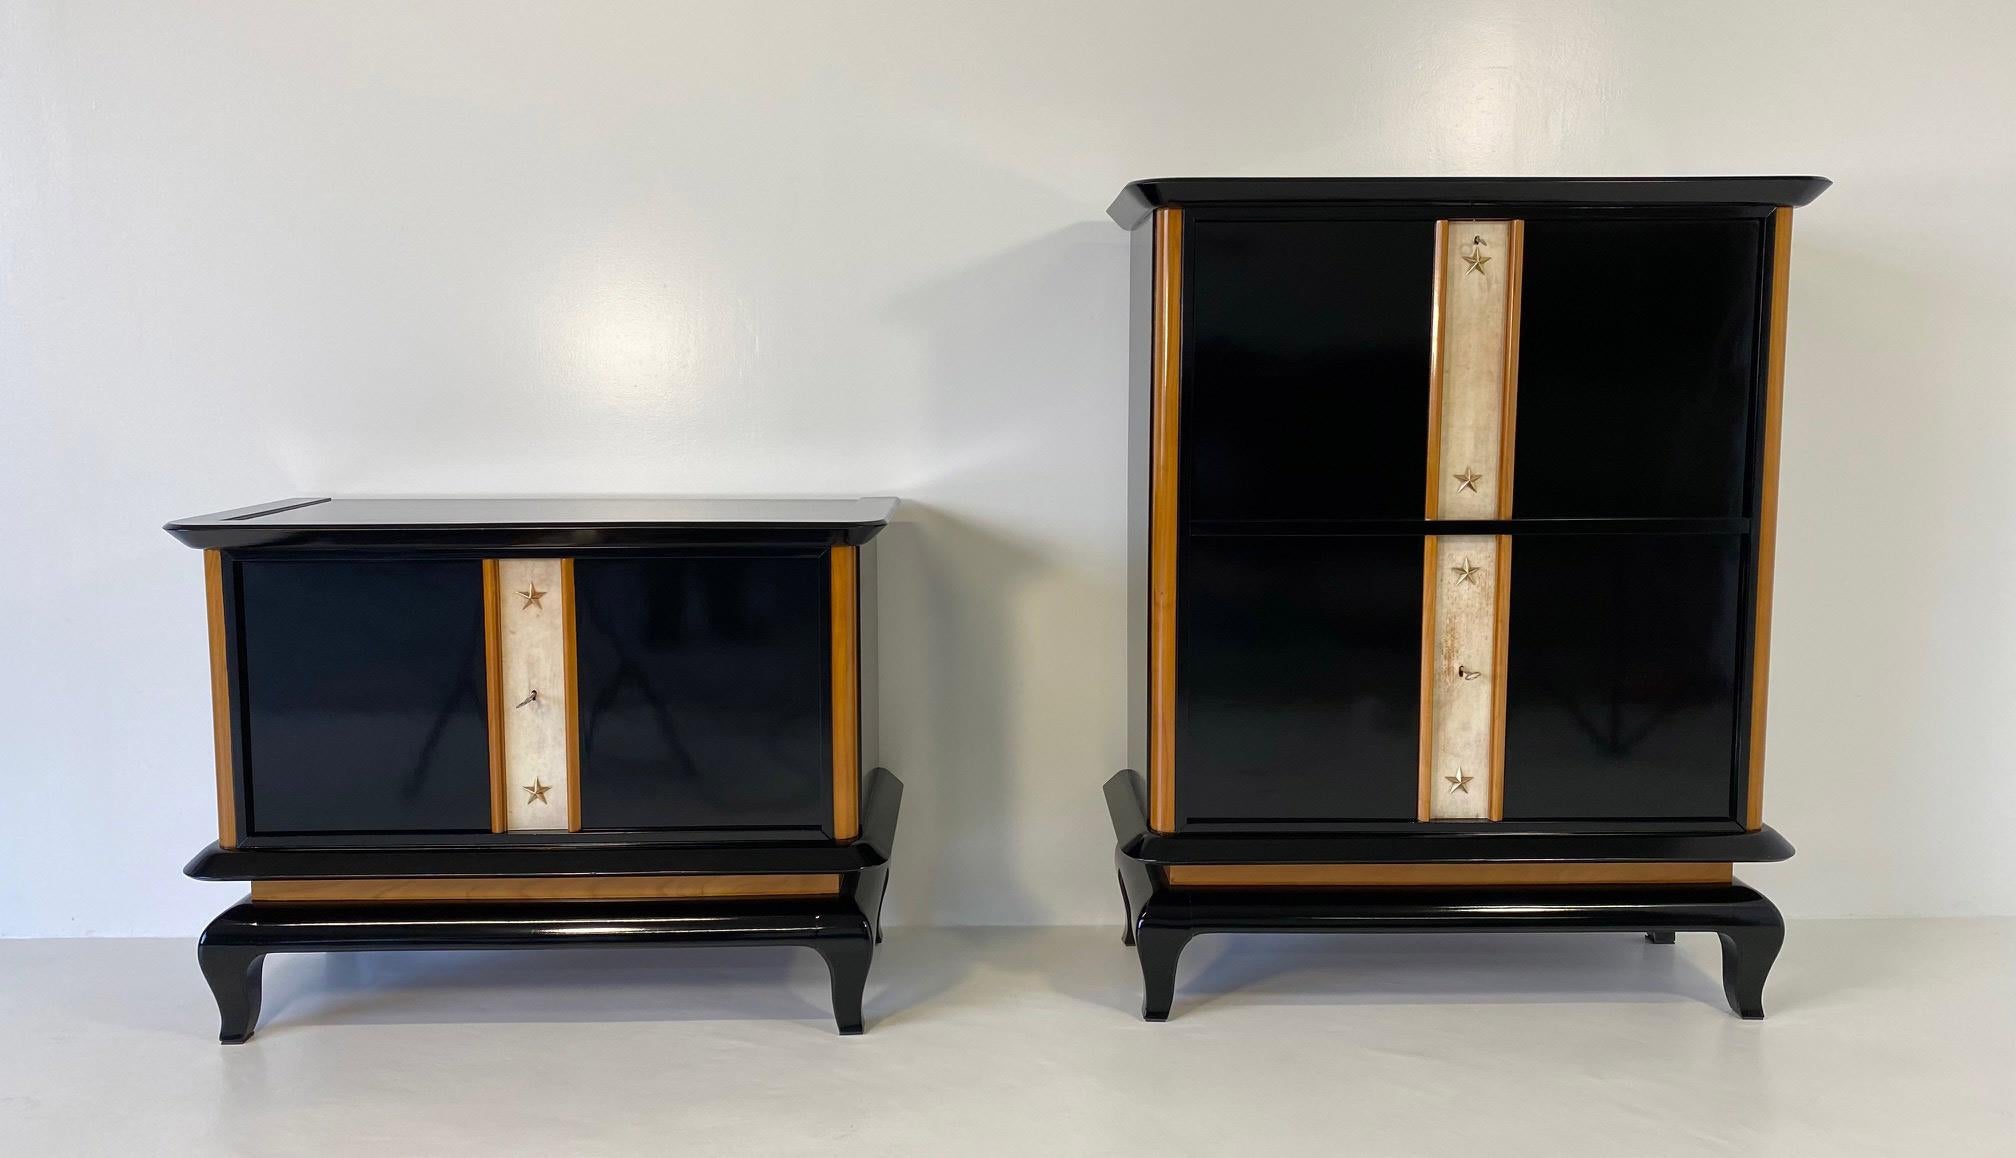 French Art Deco Cabinet in Parchment, Maple and Black Lacquer, 1940s For Sale 7